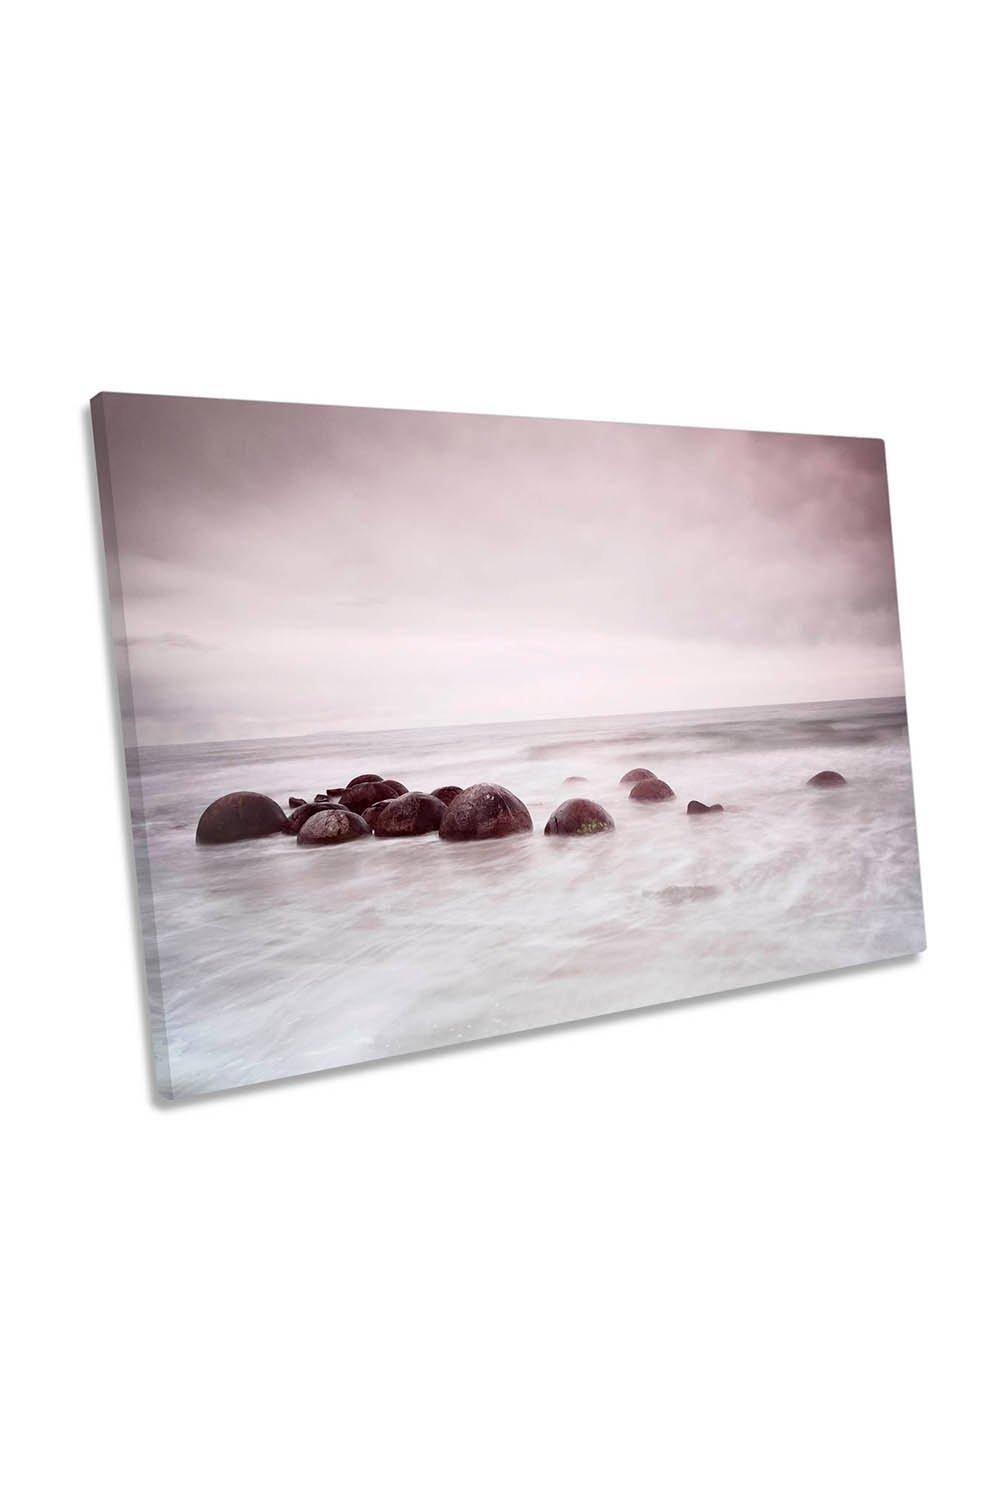 Giant Marbles Beach Misty Canvas Wall Art Picture Print